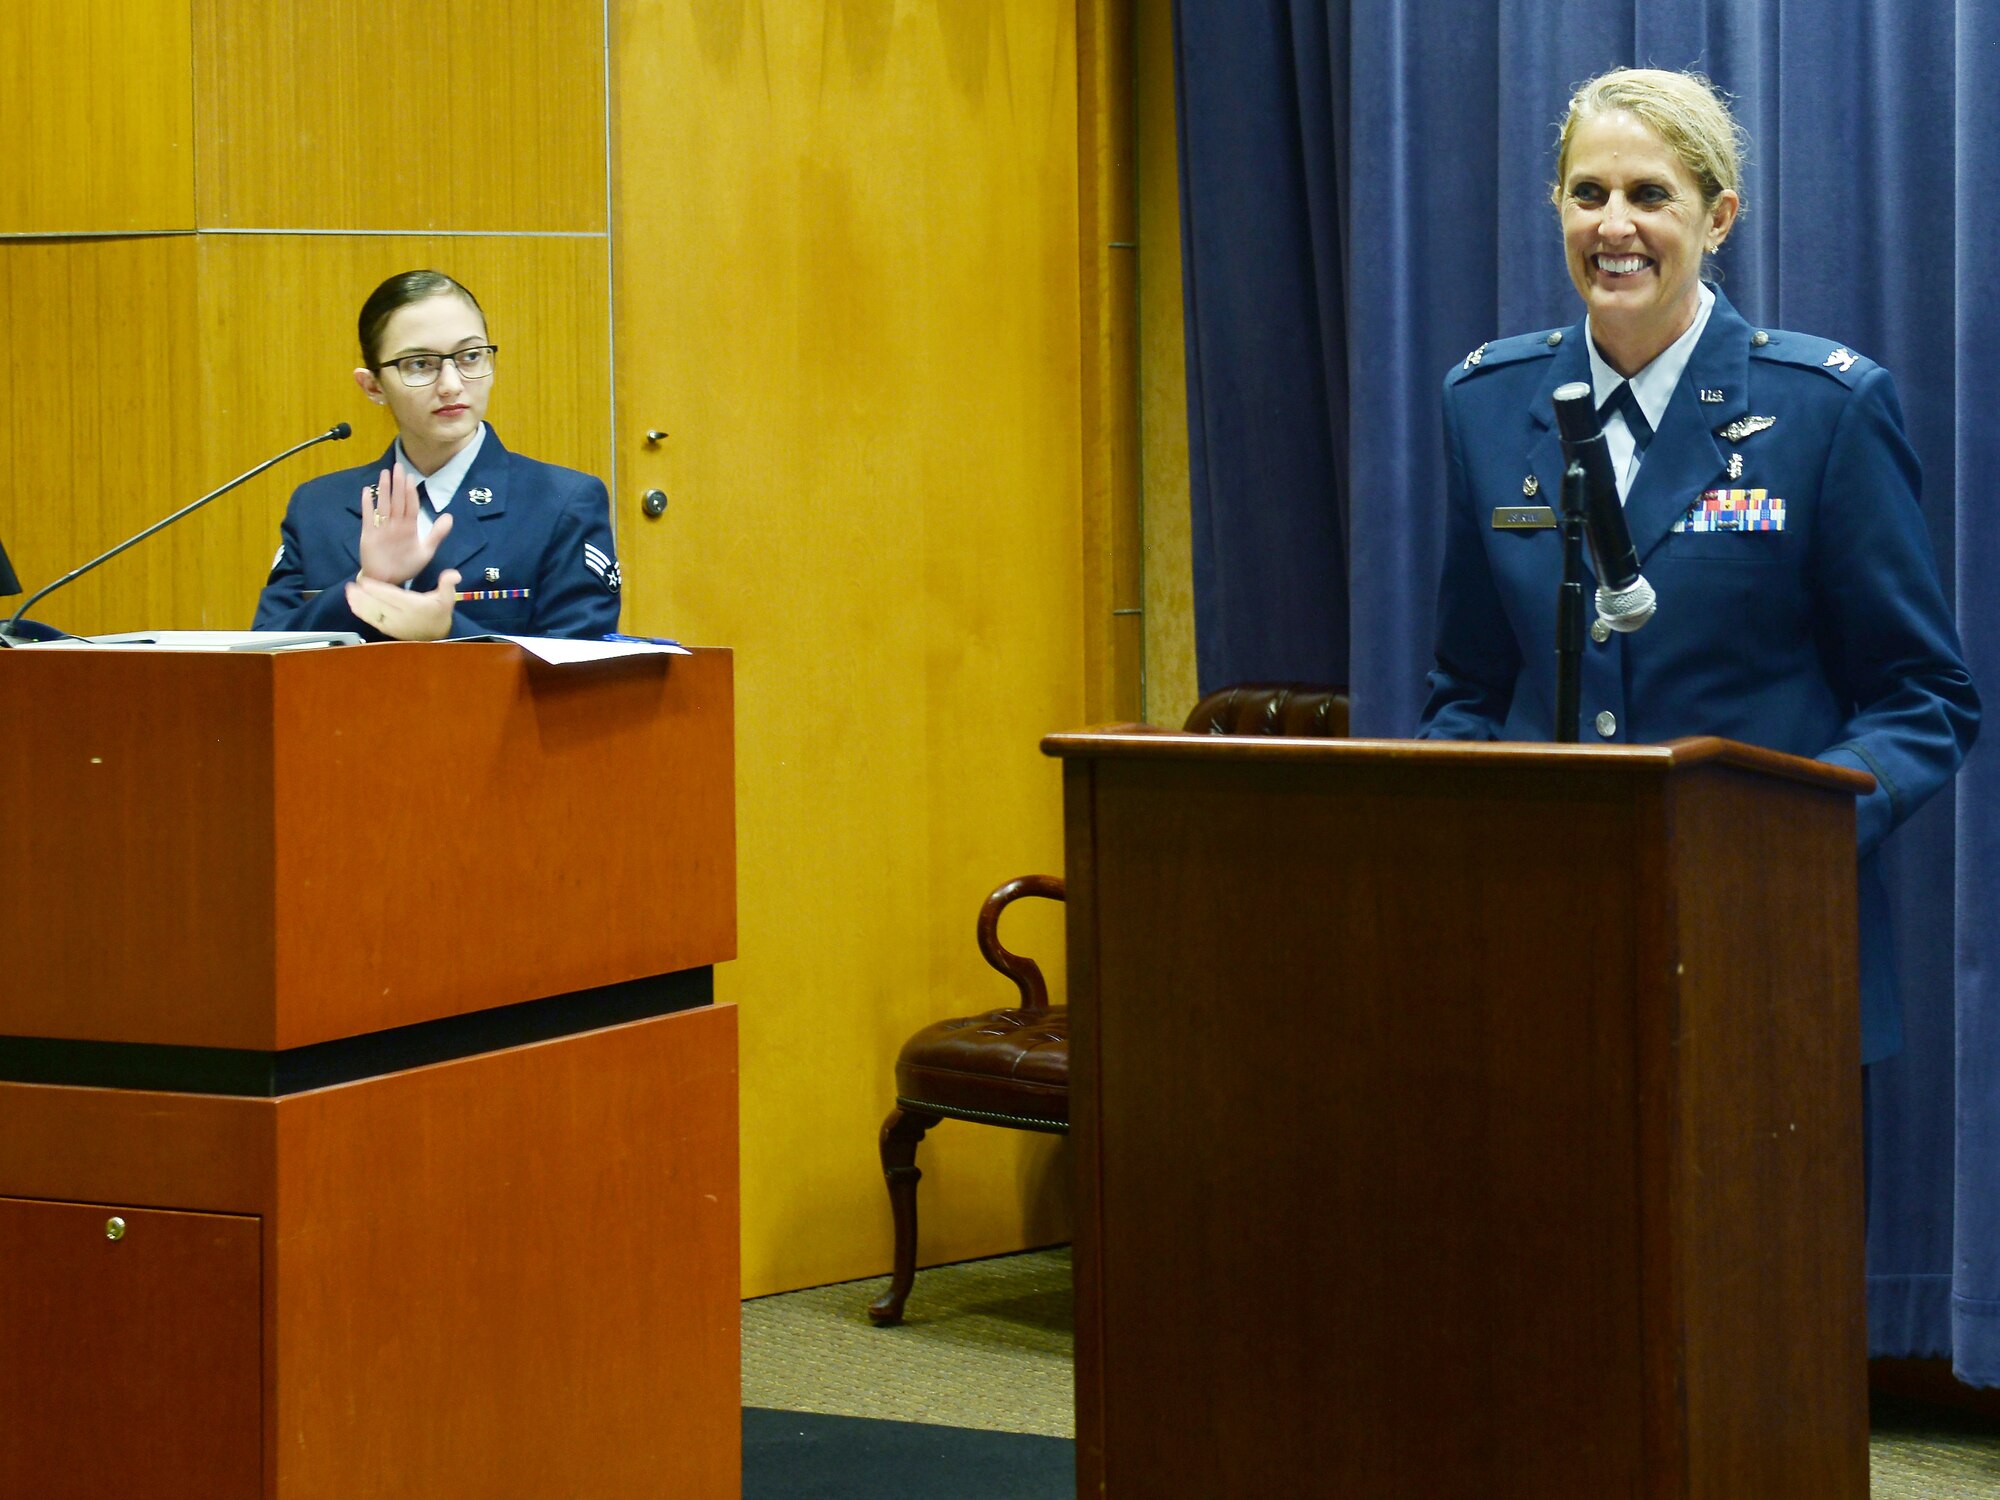 Col. Julie Ostrand, 55th Medical Group commander, gives her first speech as the new commander July  11, 2019, during the 55th Medical Group Change of Command ceremony inside the 5575h Weather Wing auditorium at Offutt Air Force Base, Nebraska. Ostrand is coming in from the 5th Medical Group at Minot AFB, North Dakota.